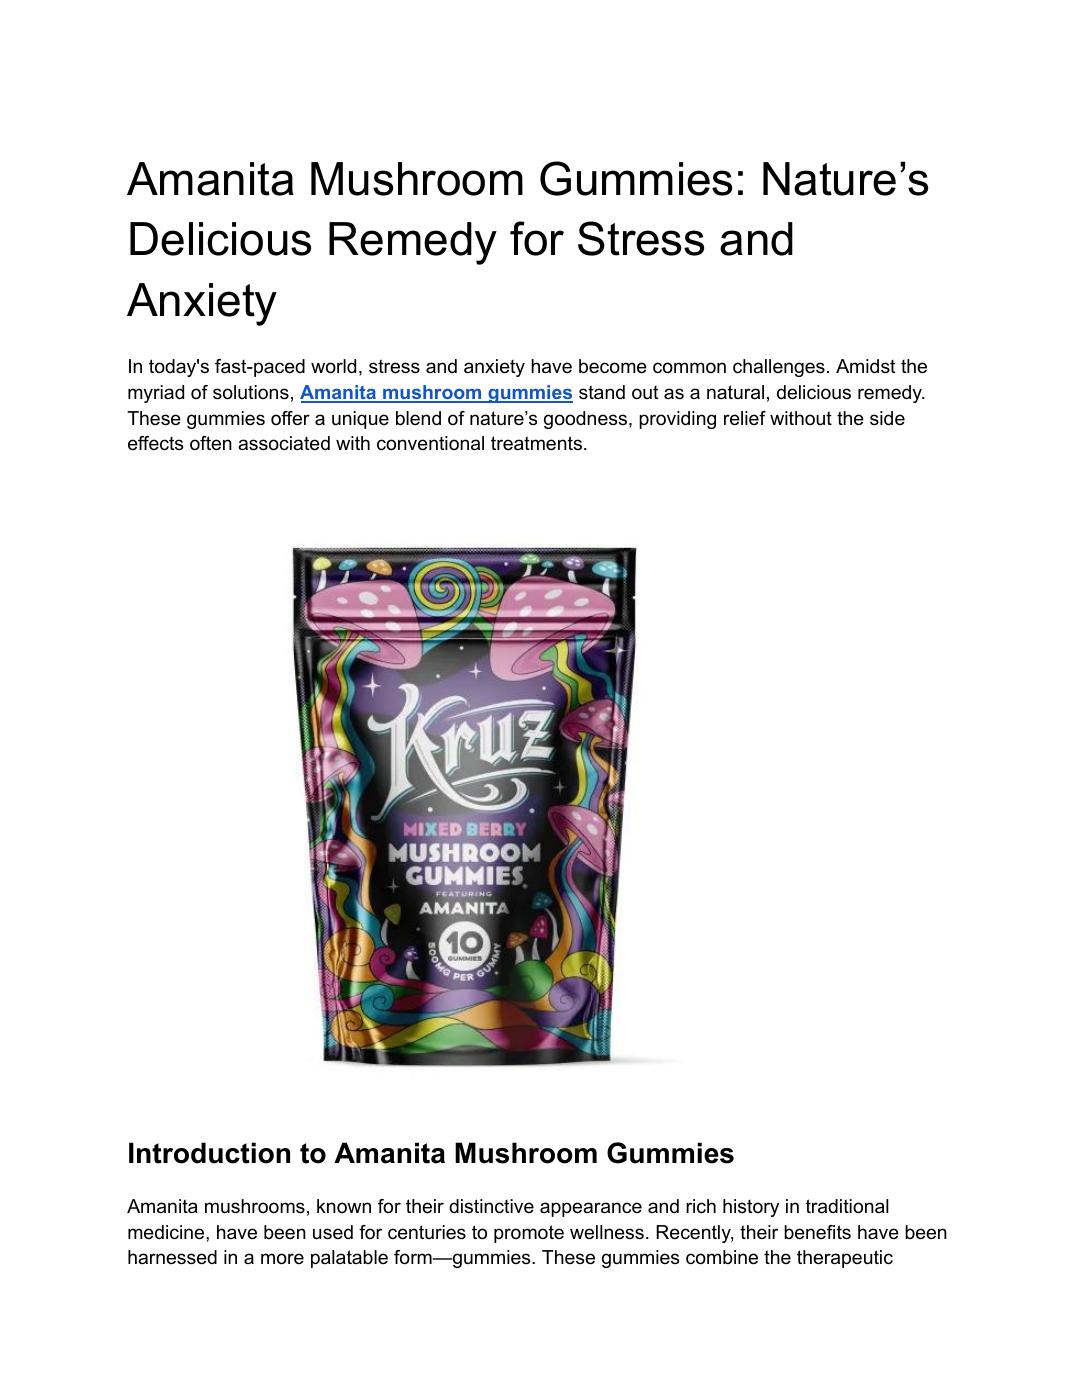 Amanita Mushroom Gummies: Nature’s Delicious Remedy for Stress and Anxiety